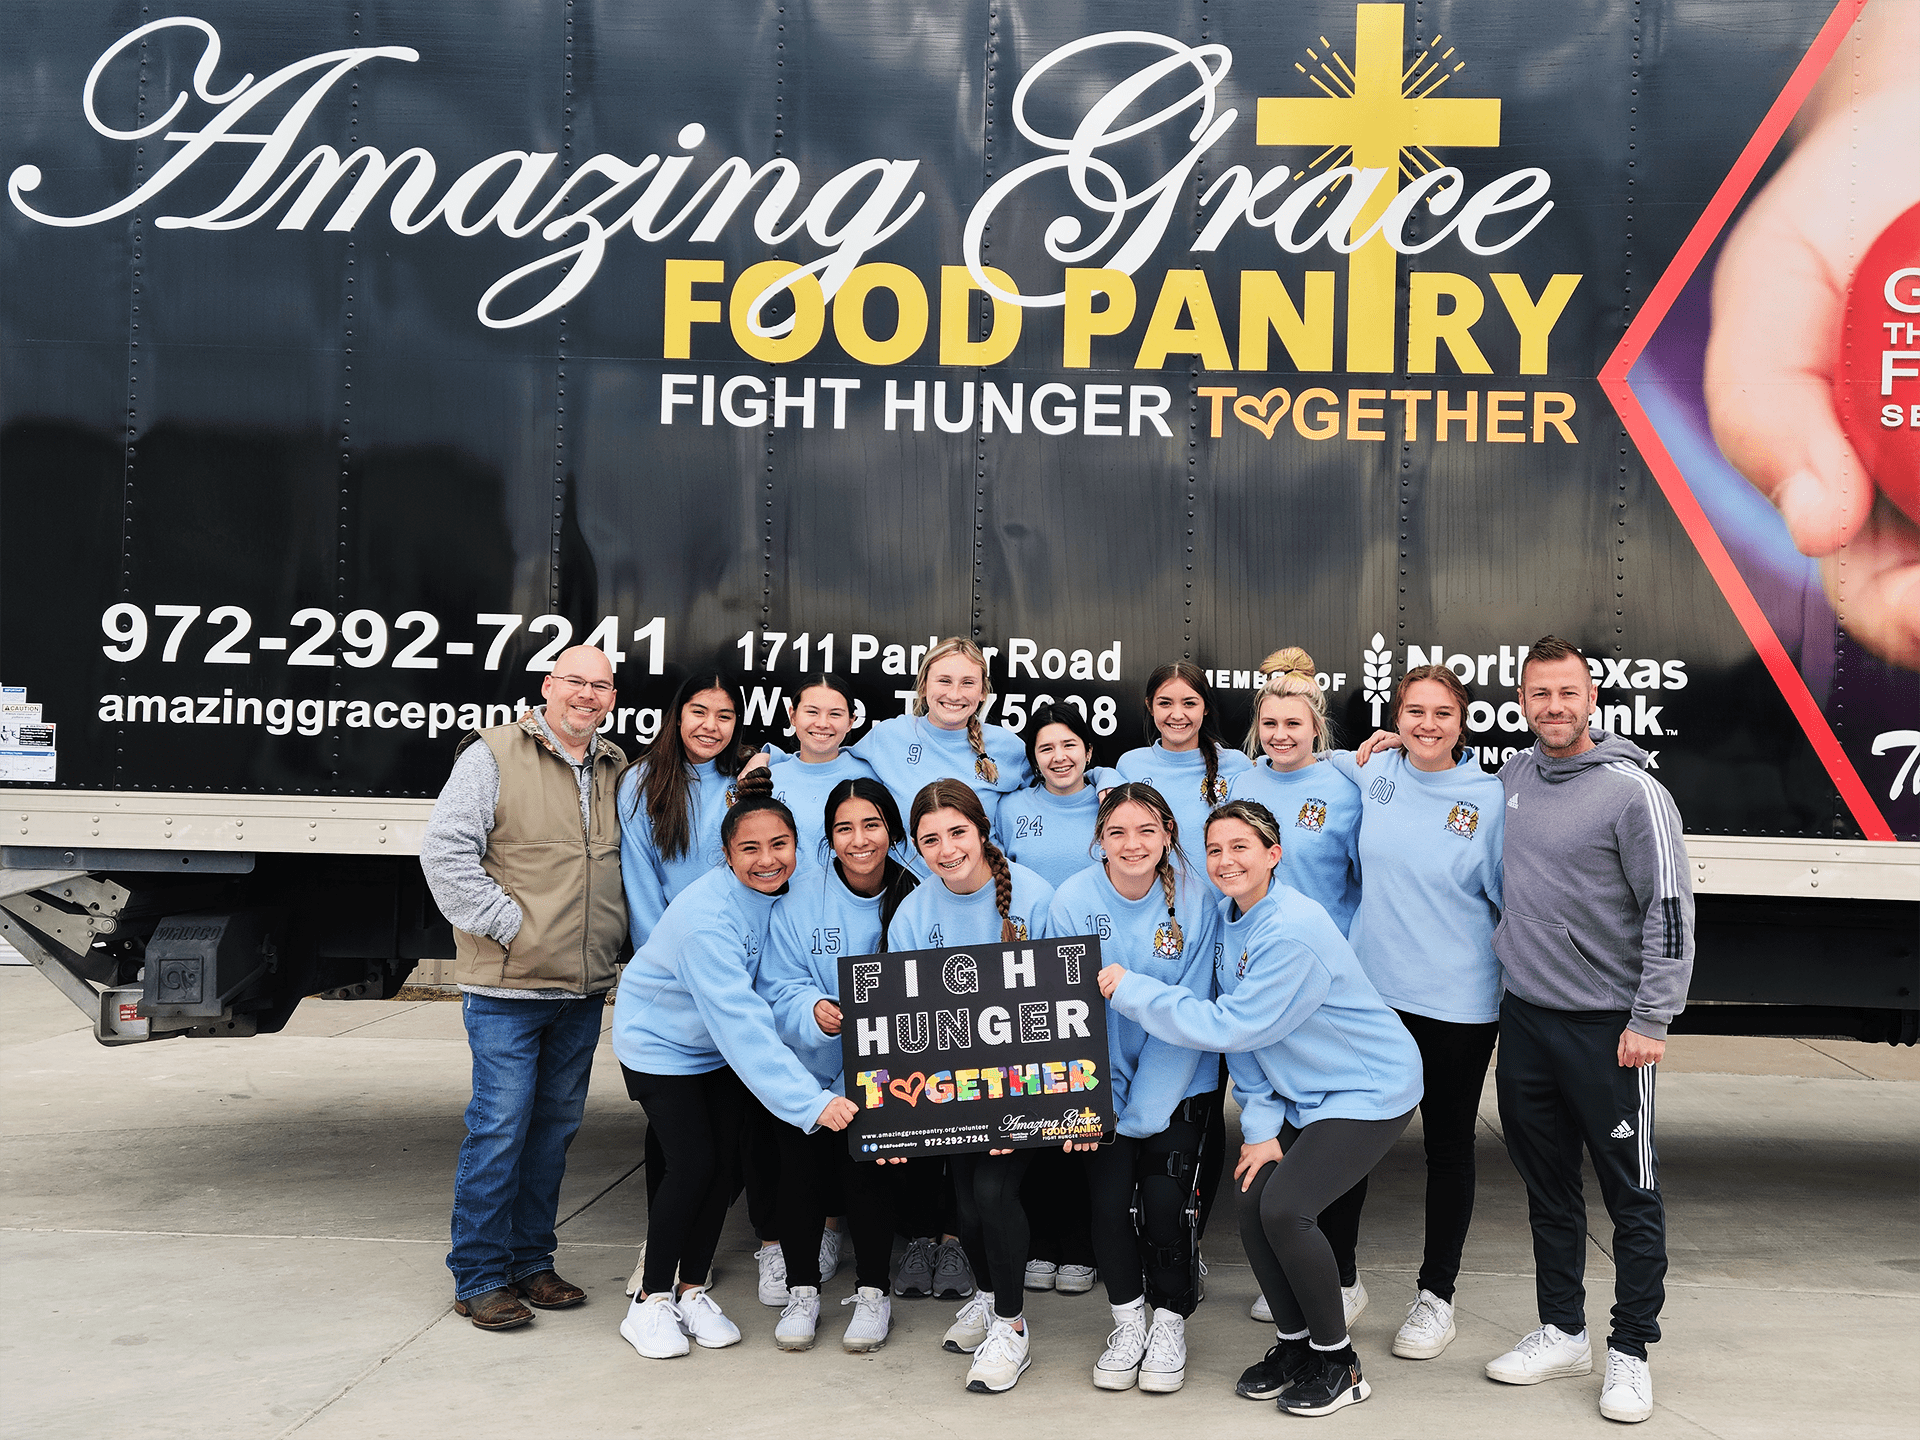 Wylie Girls Soccer Team at Amazing Grace Food Pantry